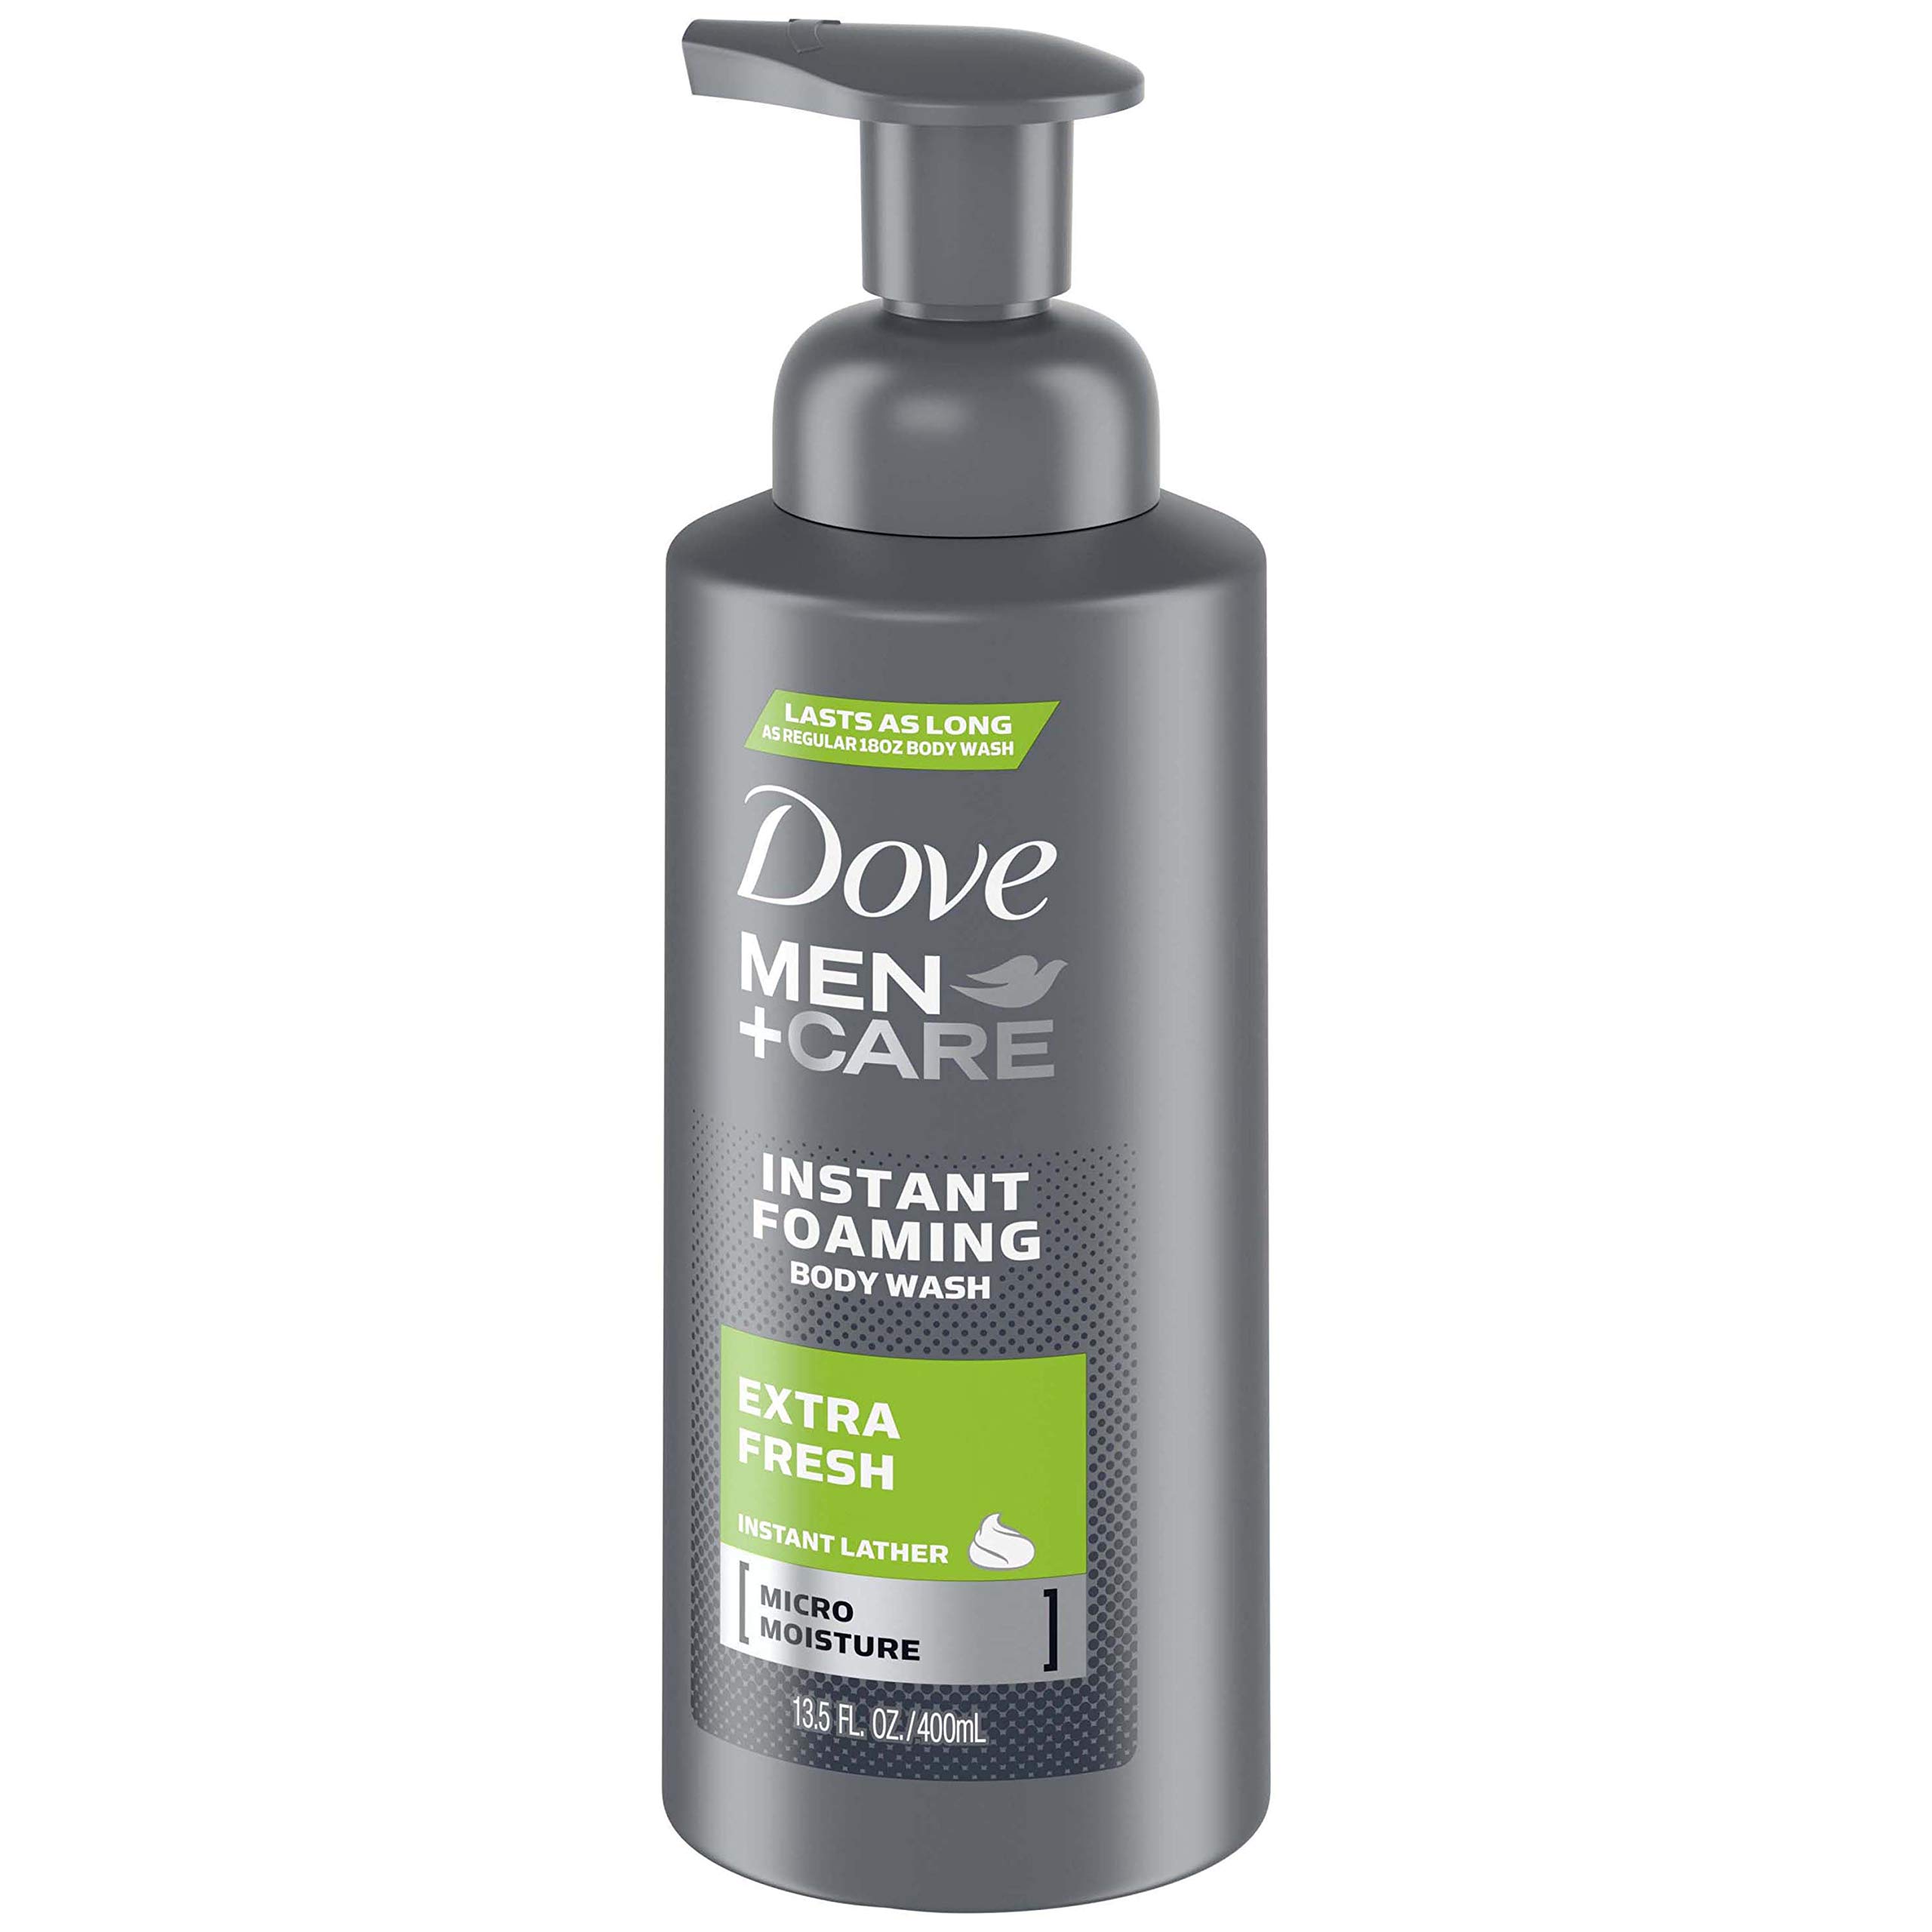 Dove Men+Care Foaming Body Wash to Hydrate Skin Extra Fresh Effectively Washes Away Bacteria While Nourishing Your Skin 13.5 oz